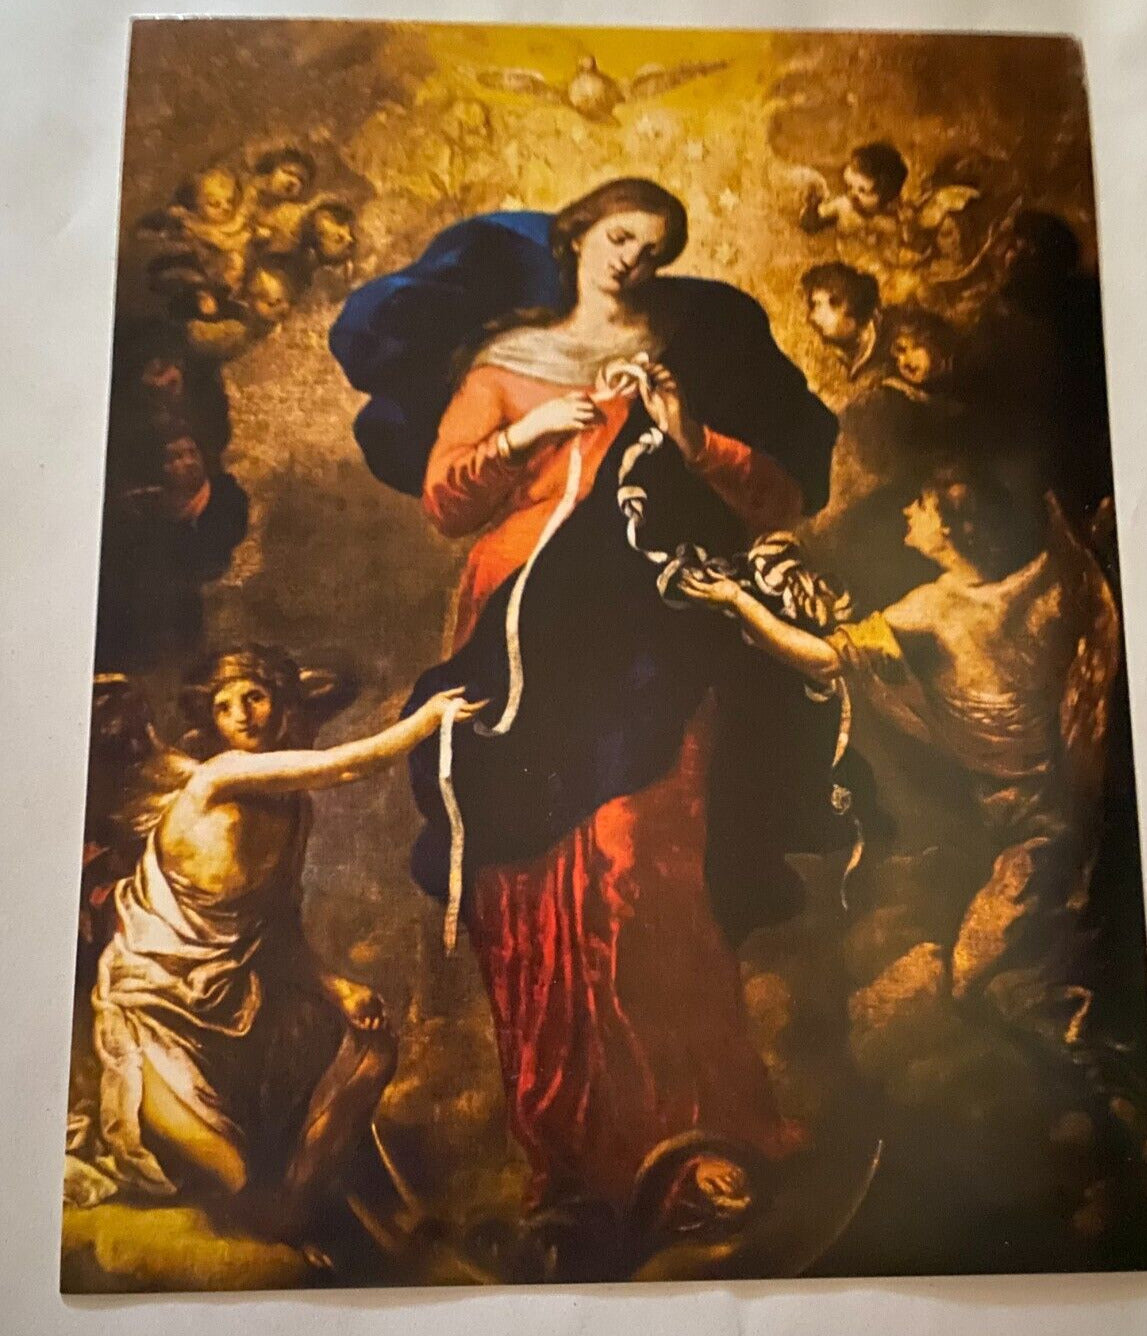 Our Lady Undoer (Untier) of Knots 8" X 10" Image with Prayer on back, New - Bob and Penny Lord